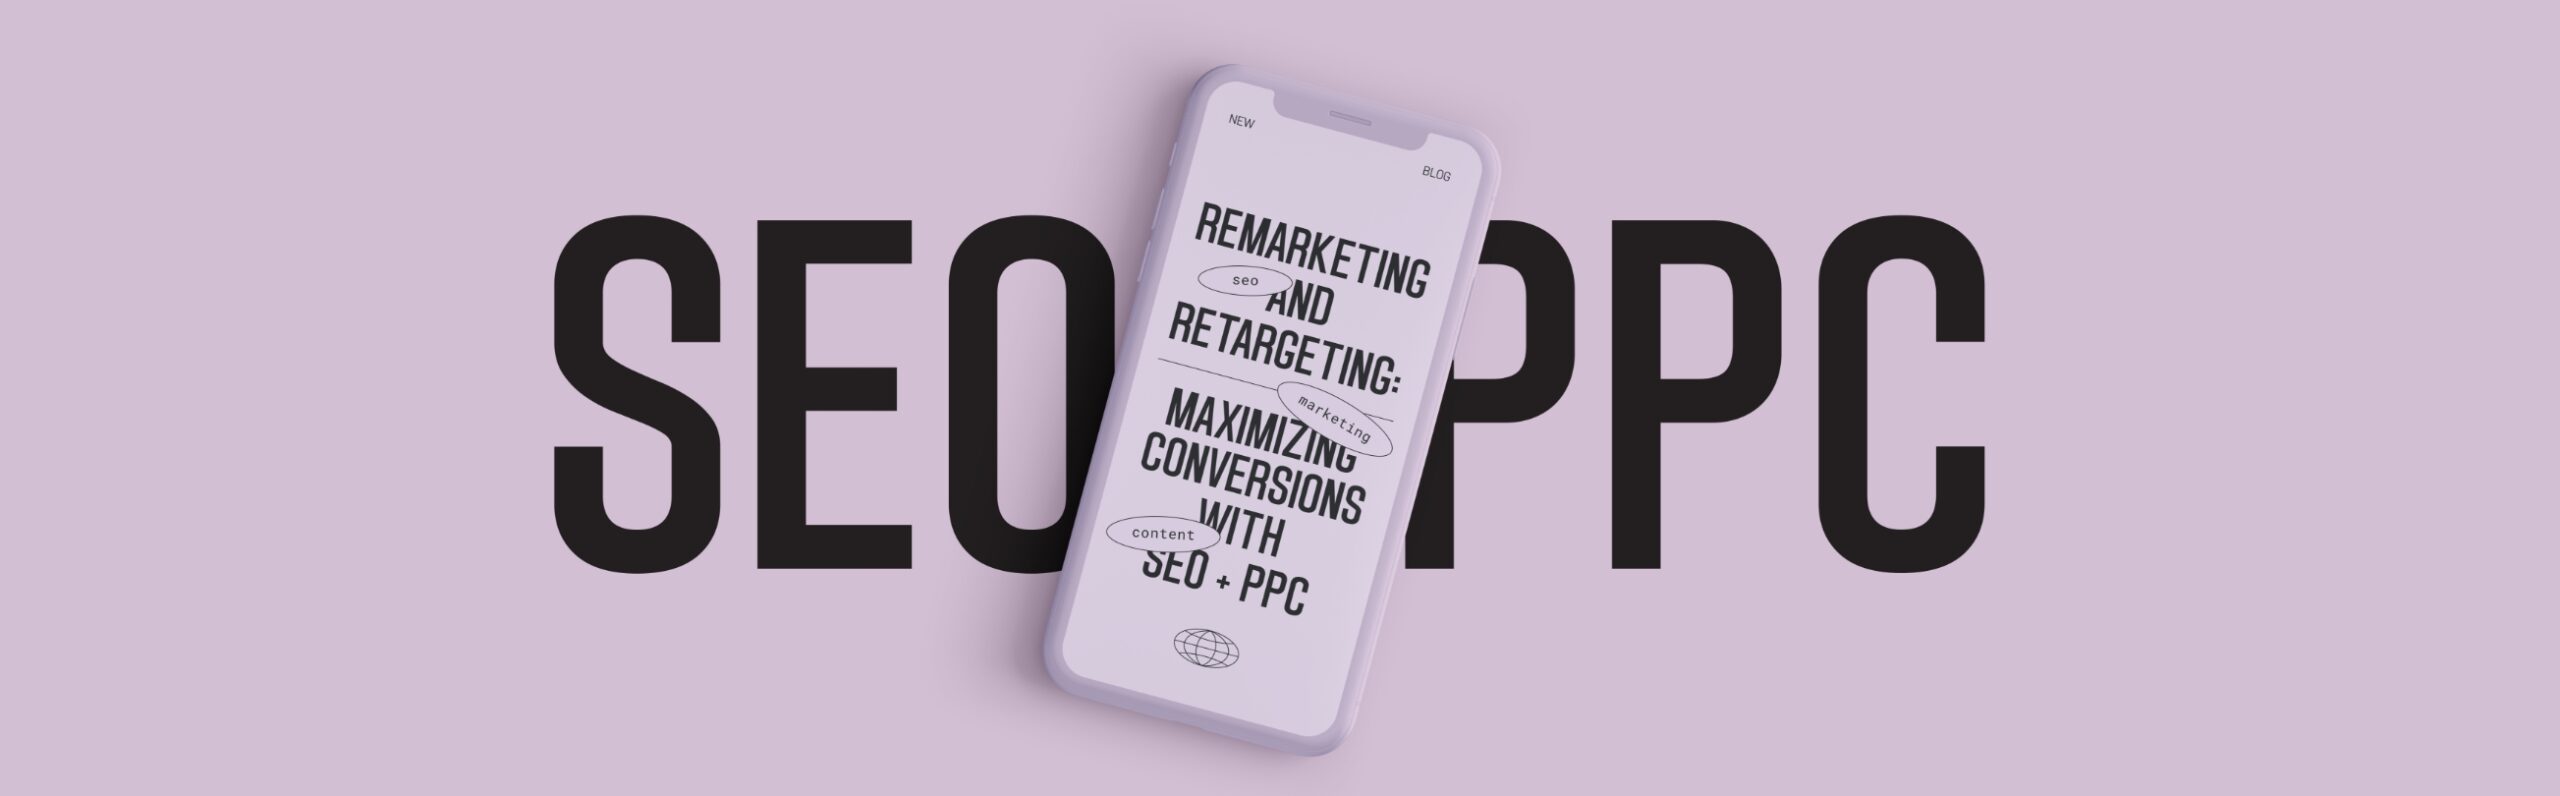 Remarketing and Retargeting: Maximizing Conversions with SEO and PPC